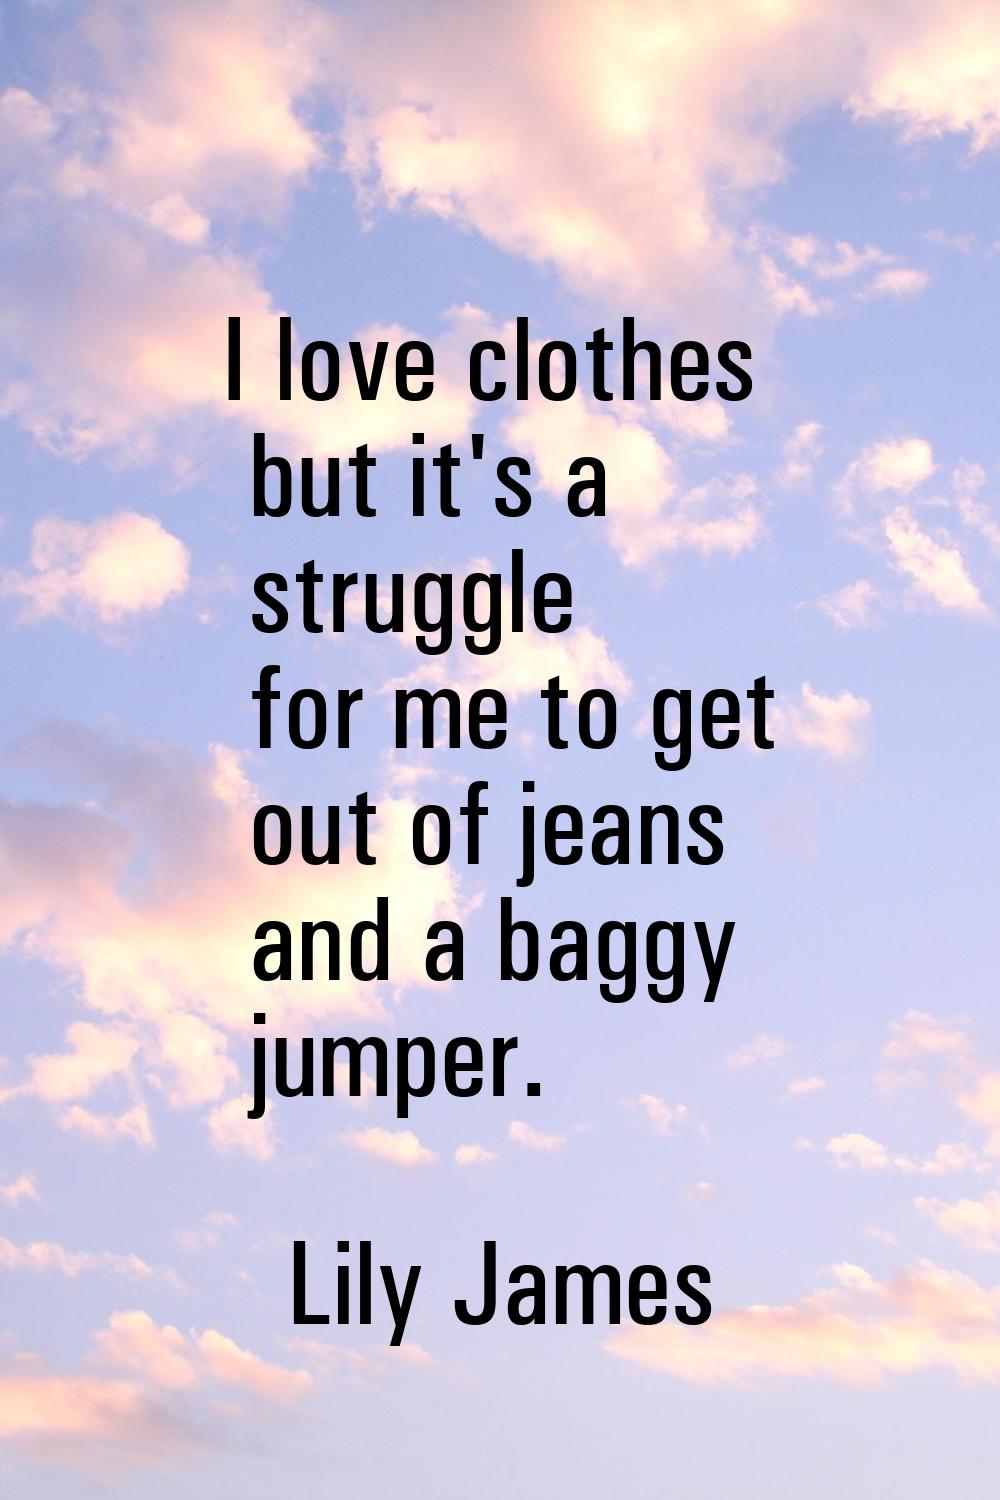 I love clothes but it's a struggle for me to get out of jeans and a baggy jumper.